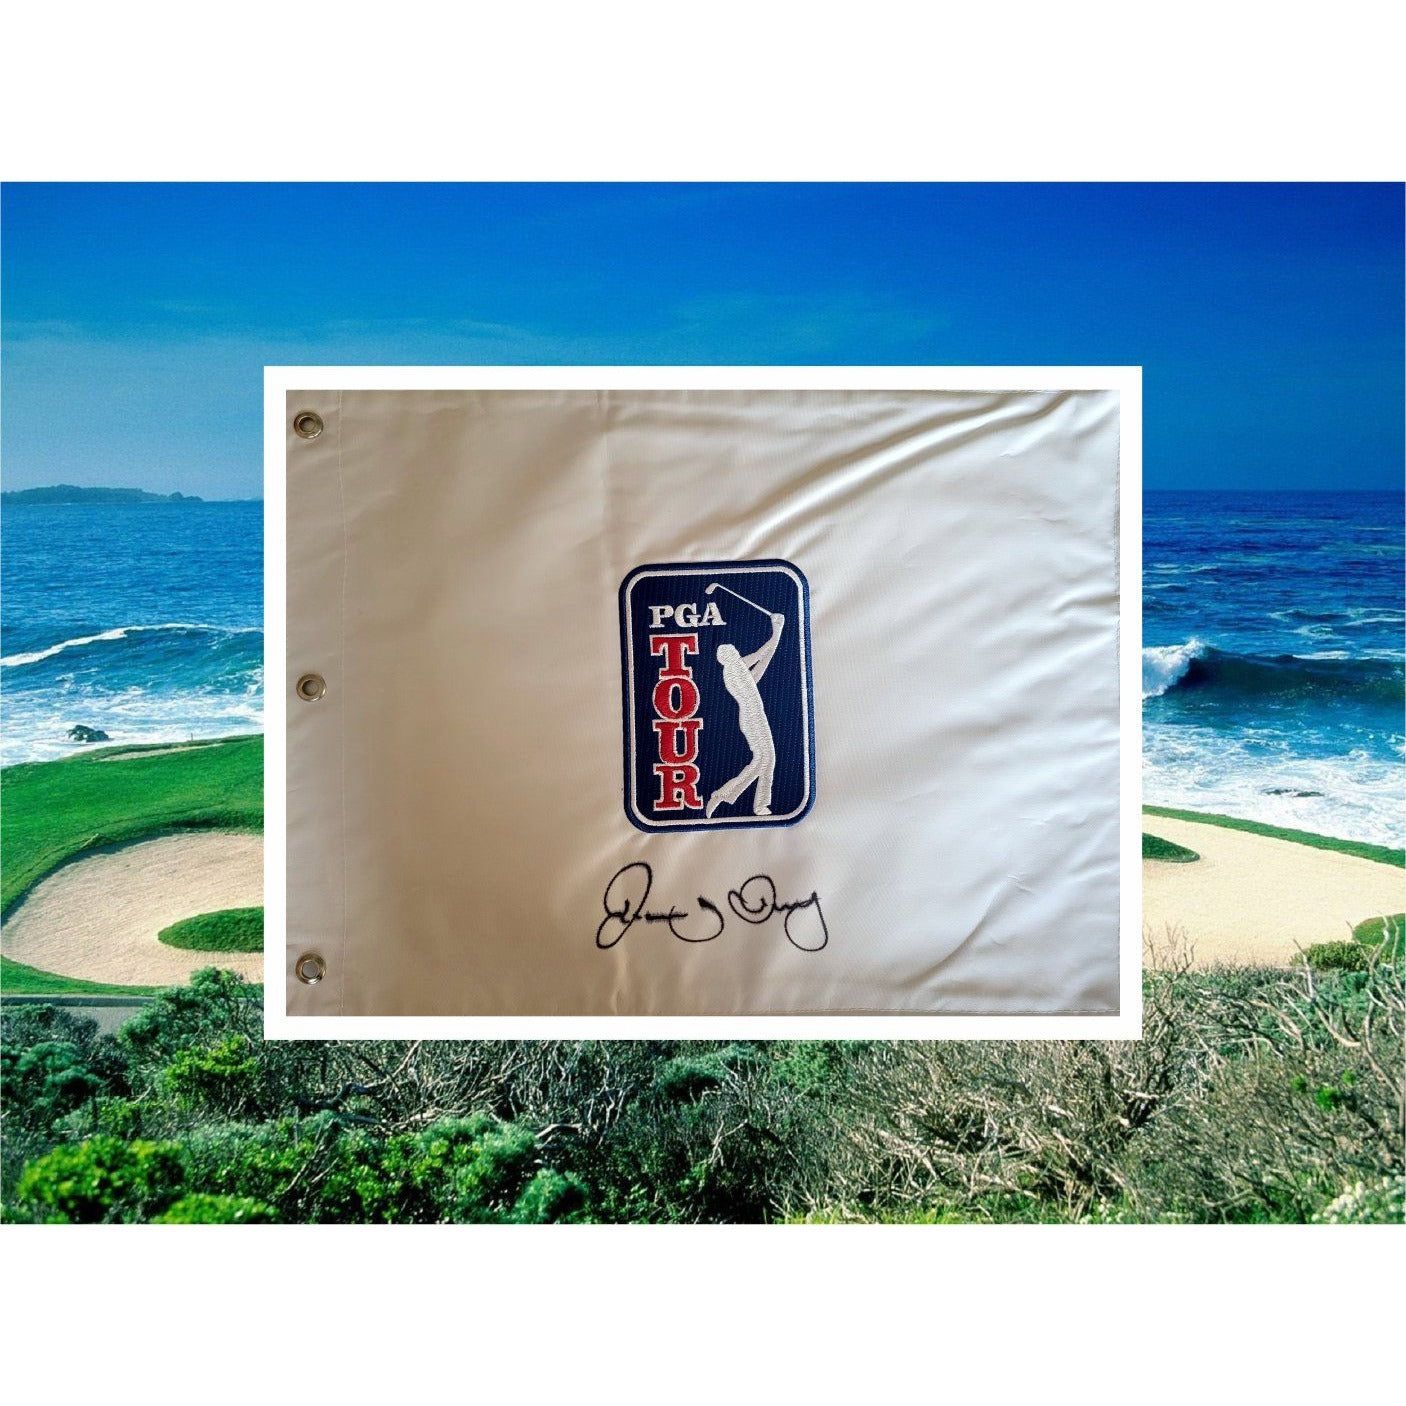 Rory McIlroy PGA Tour golf flag embroidered sign with proof